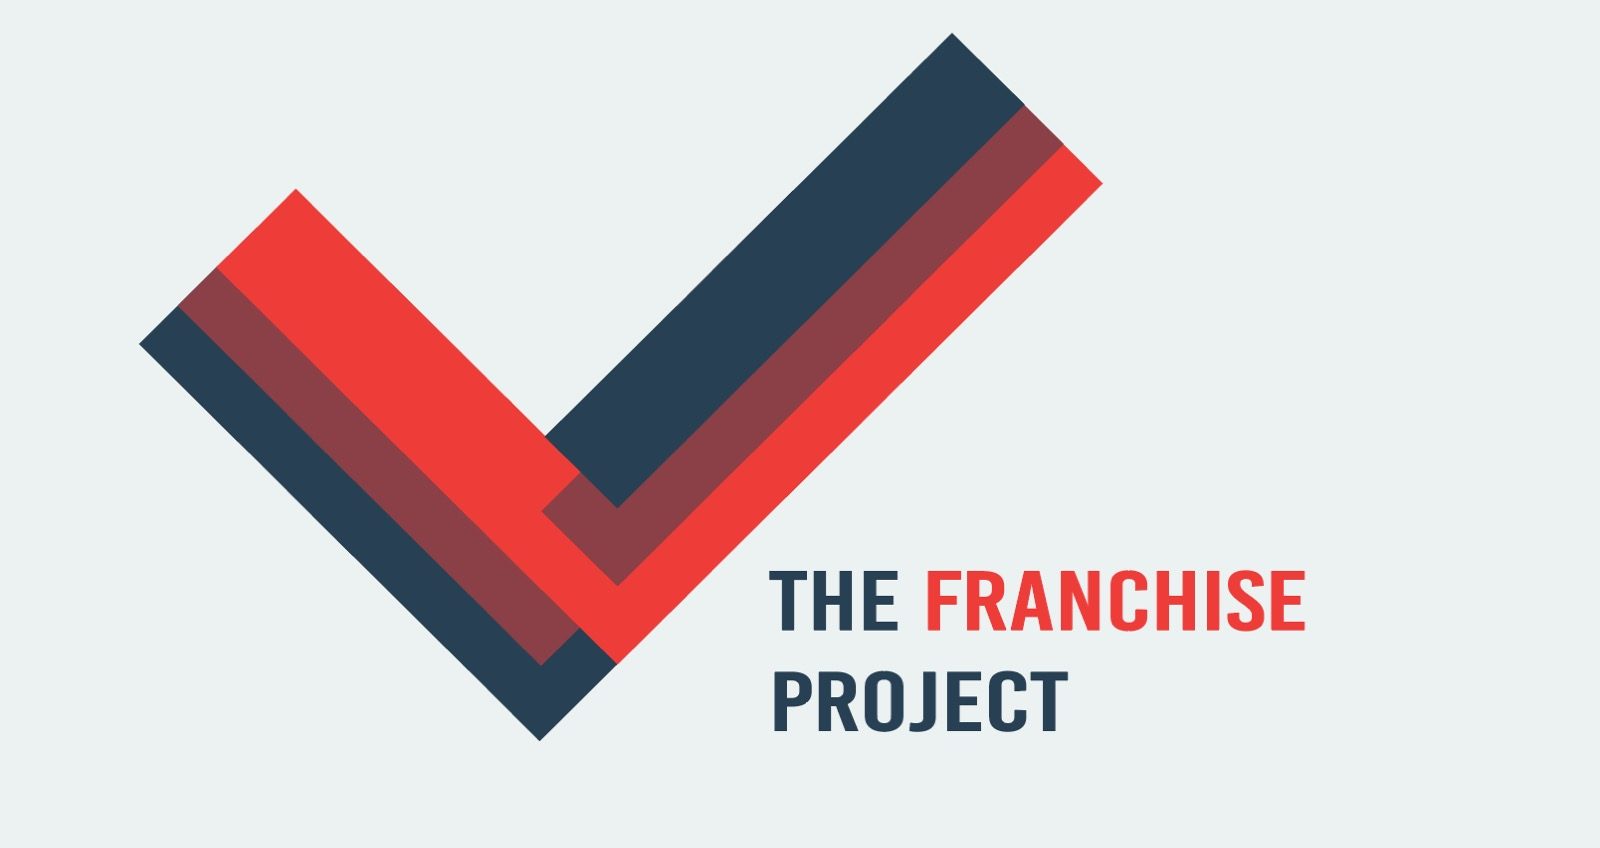 The franchise project